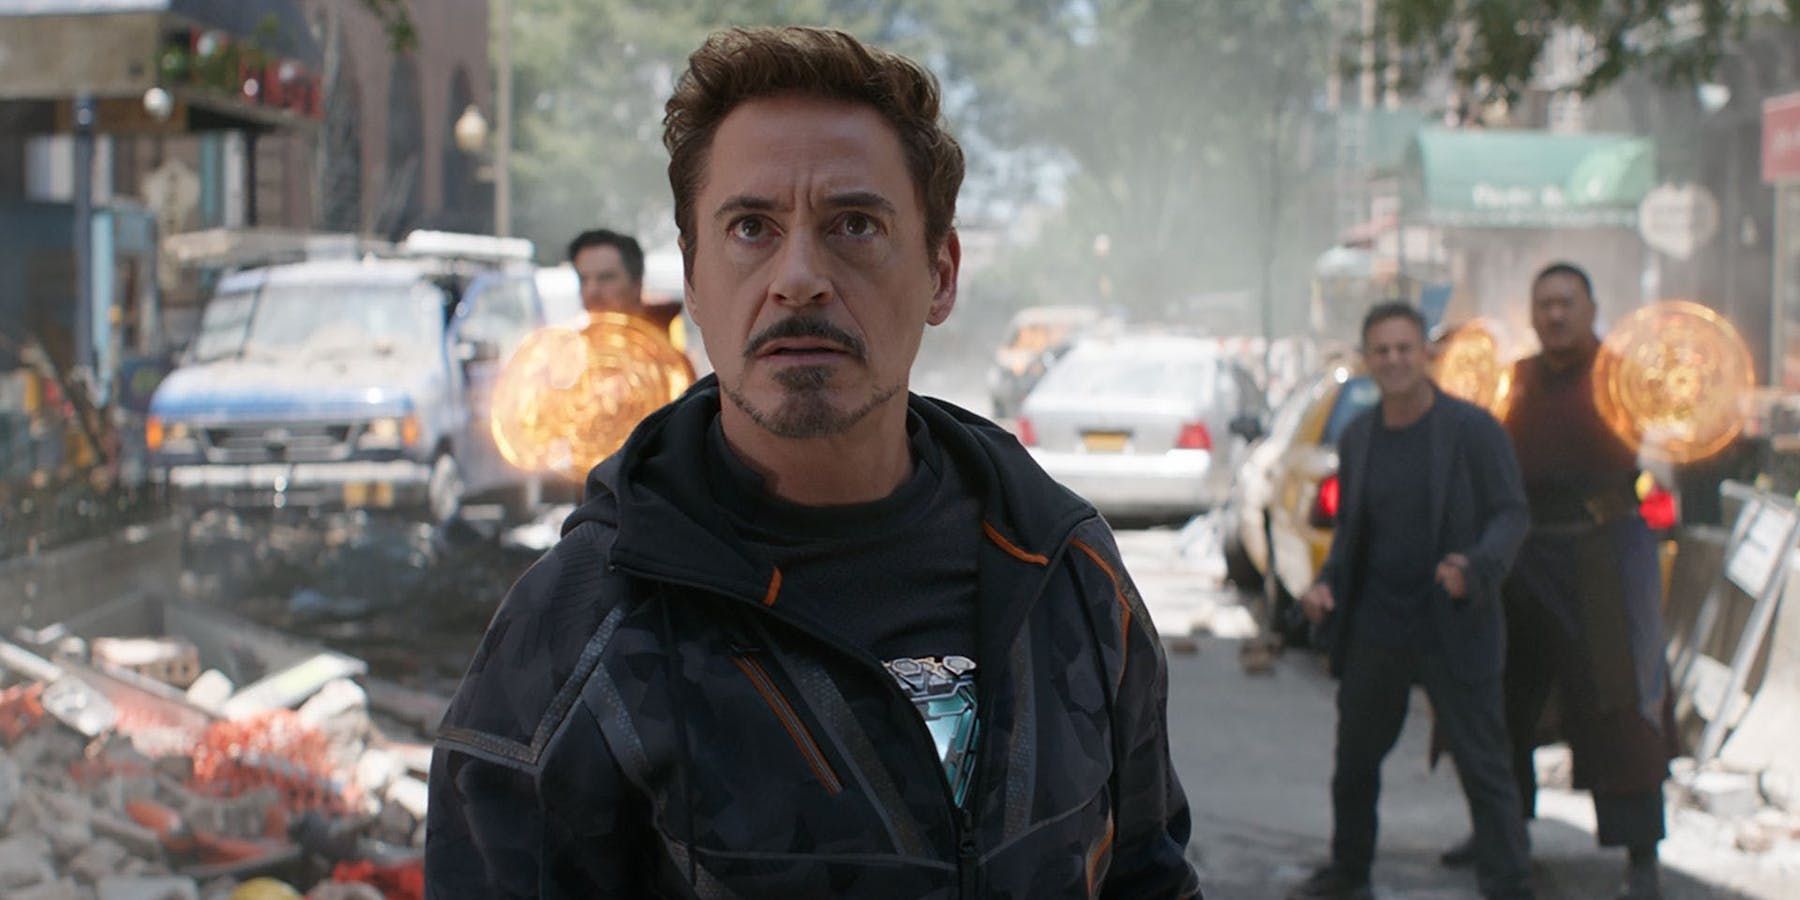 Robert Downey Jr’s Doctor Dolittle Movie Delayed to January 2020